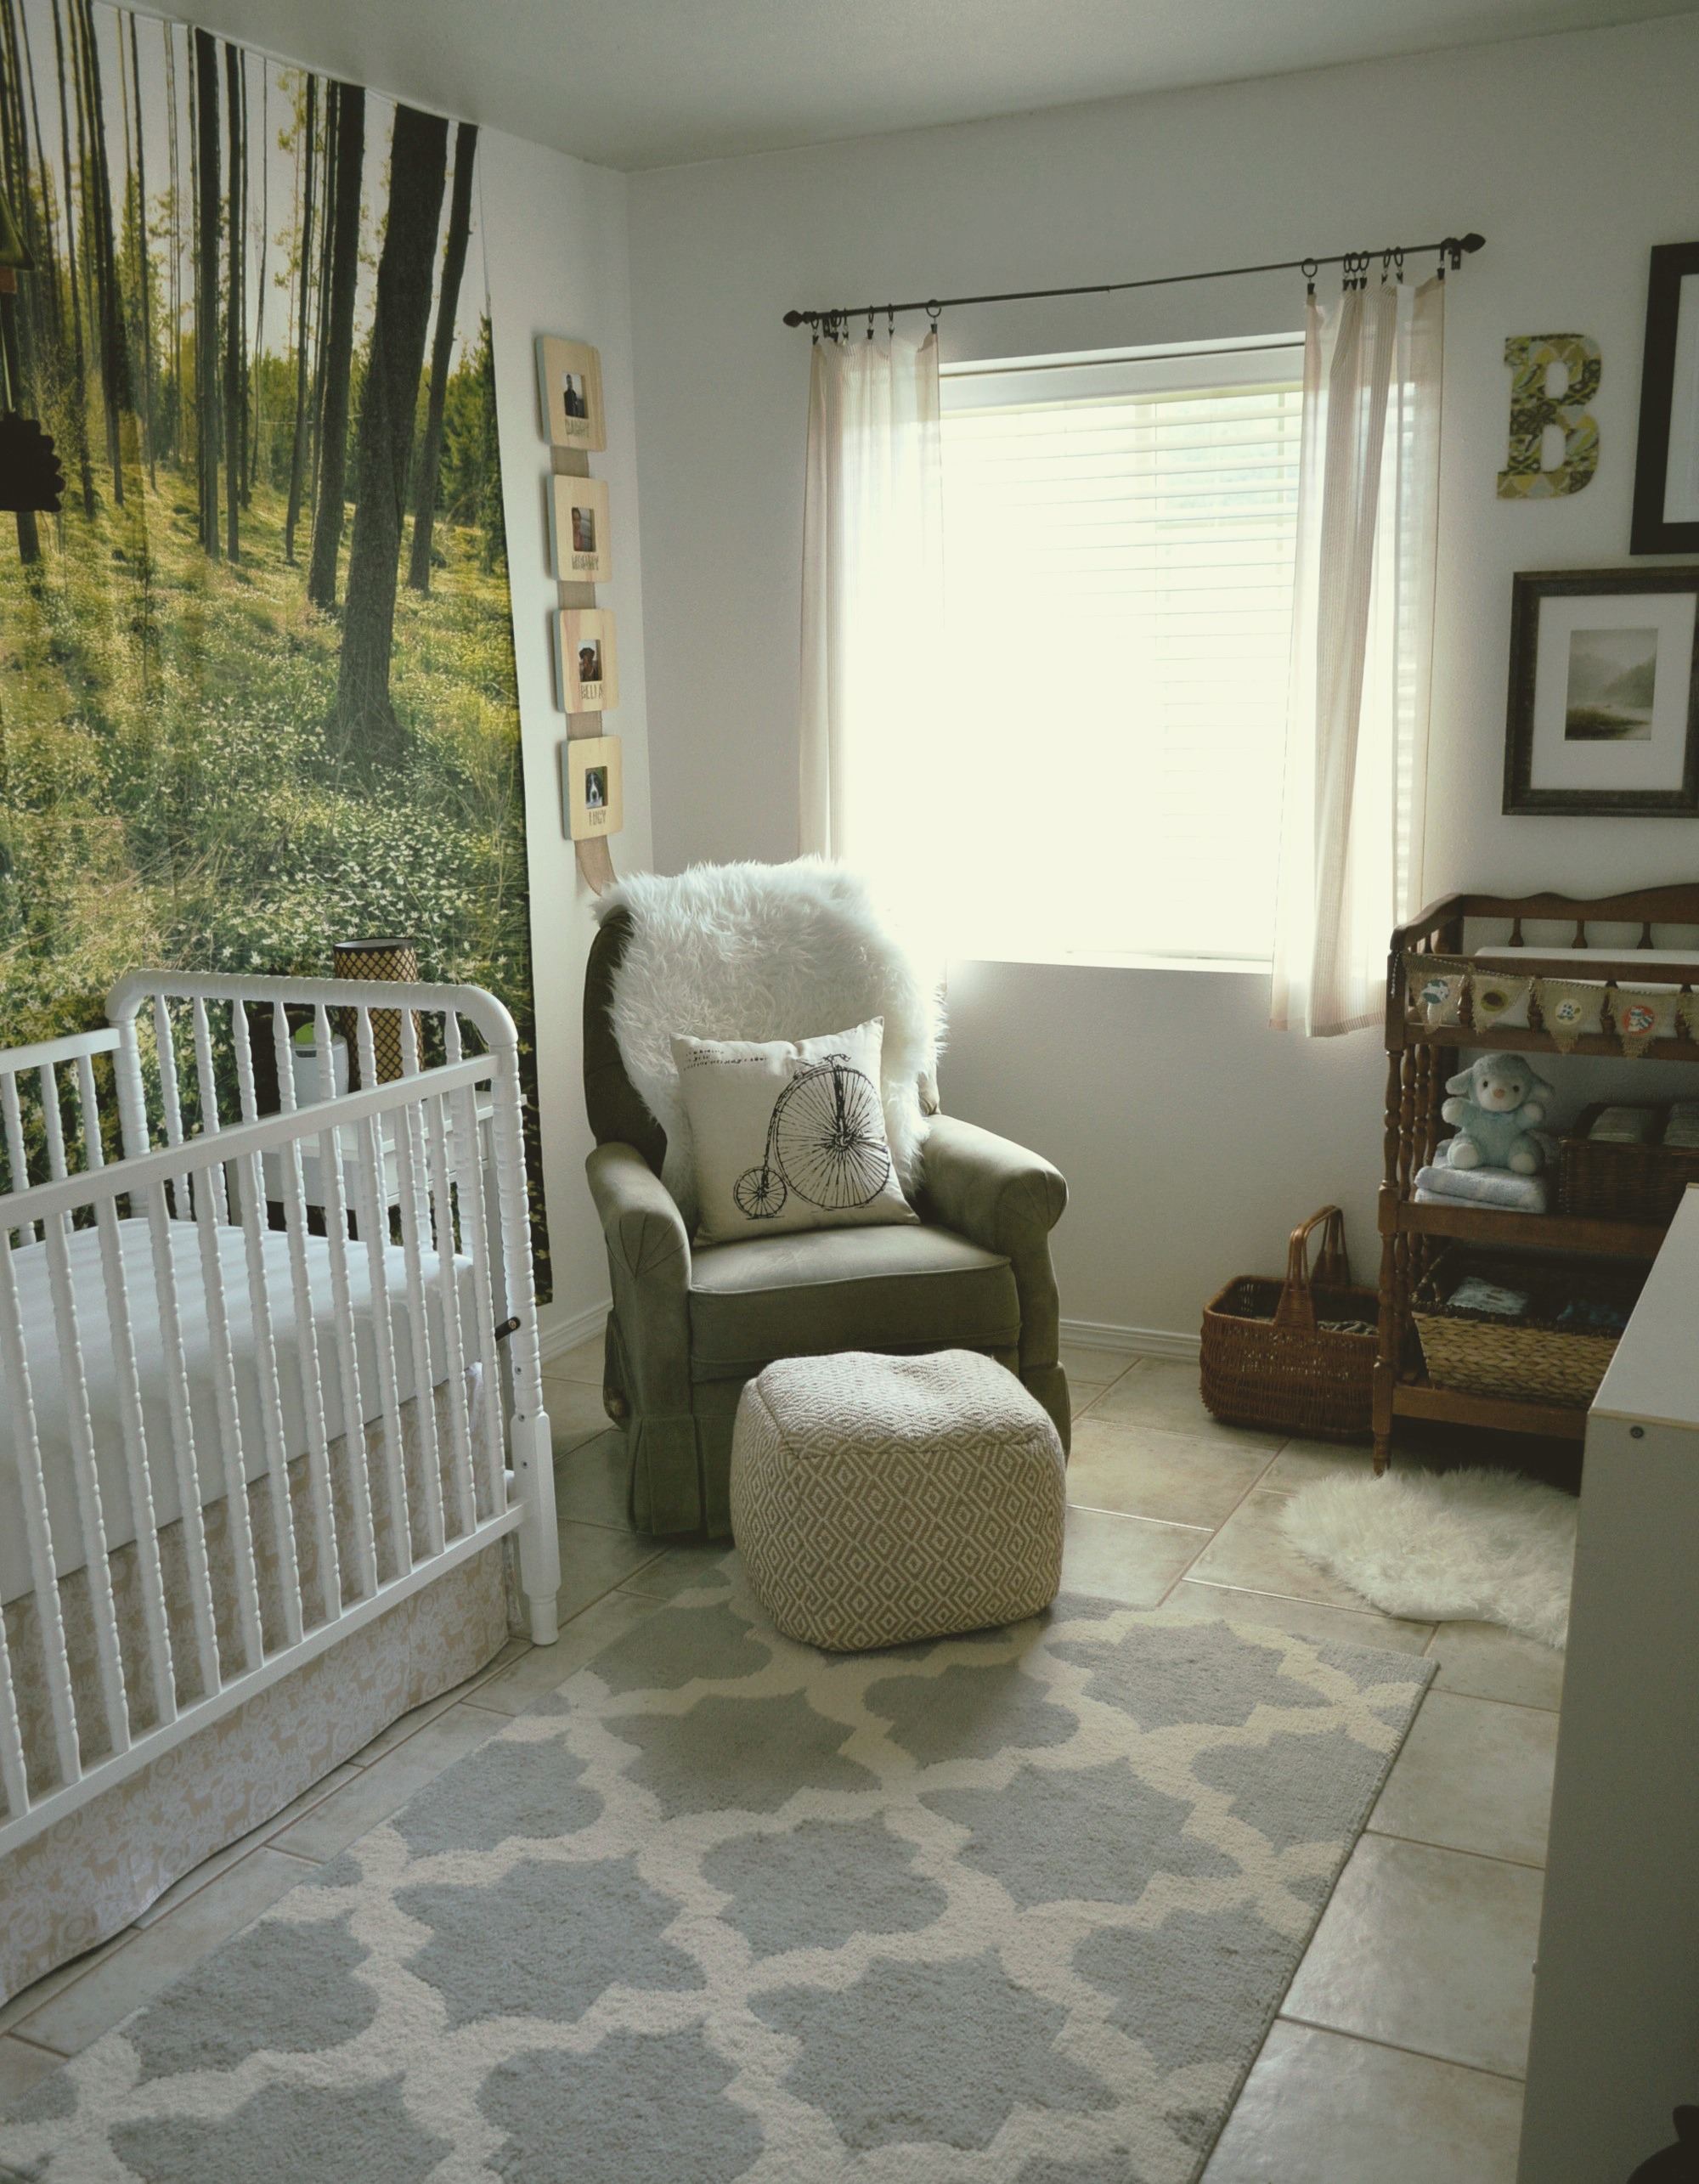 Modern and Whimsy Touches in this "Woodsy" Nursery